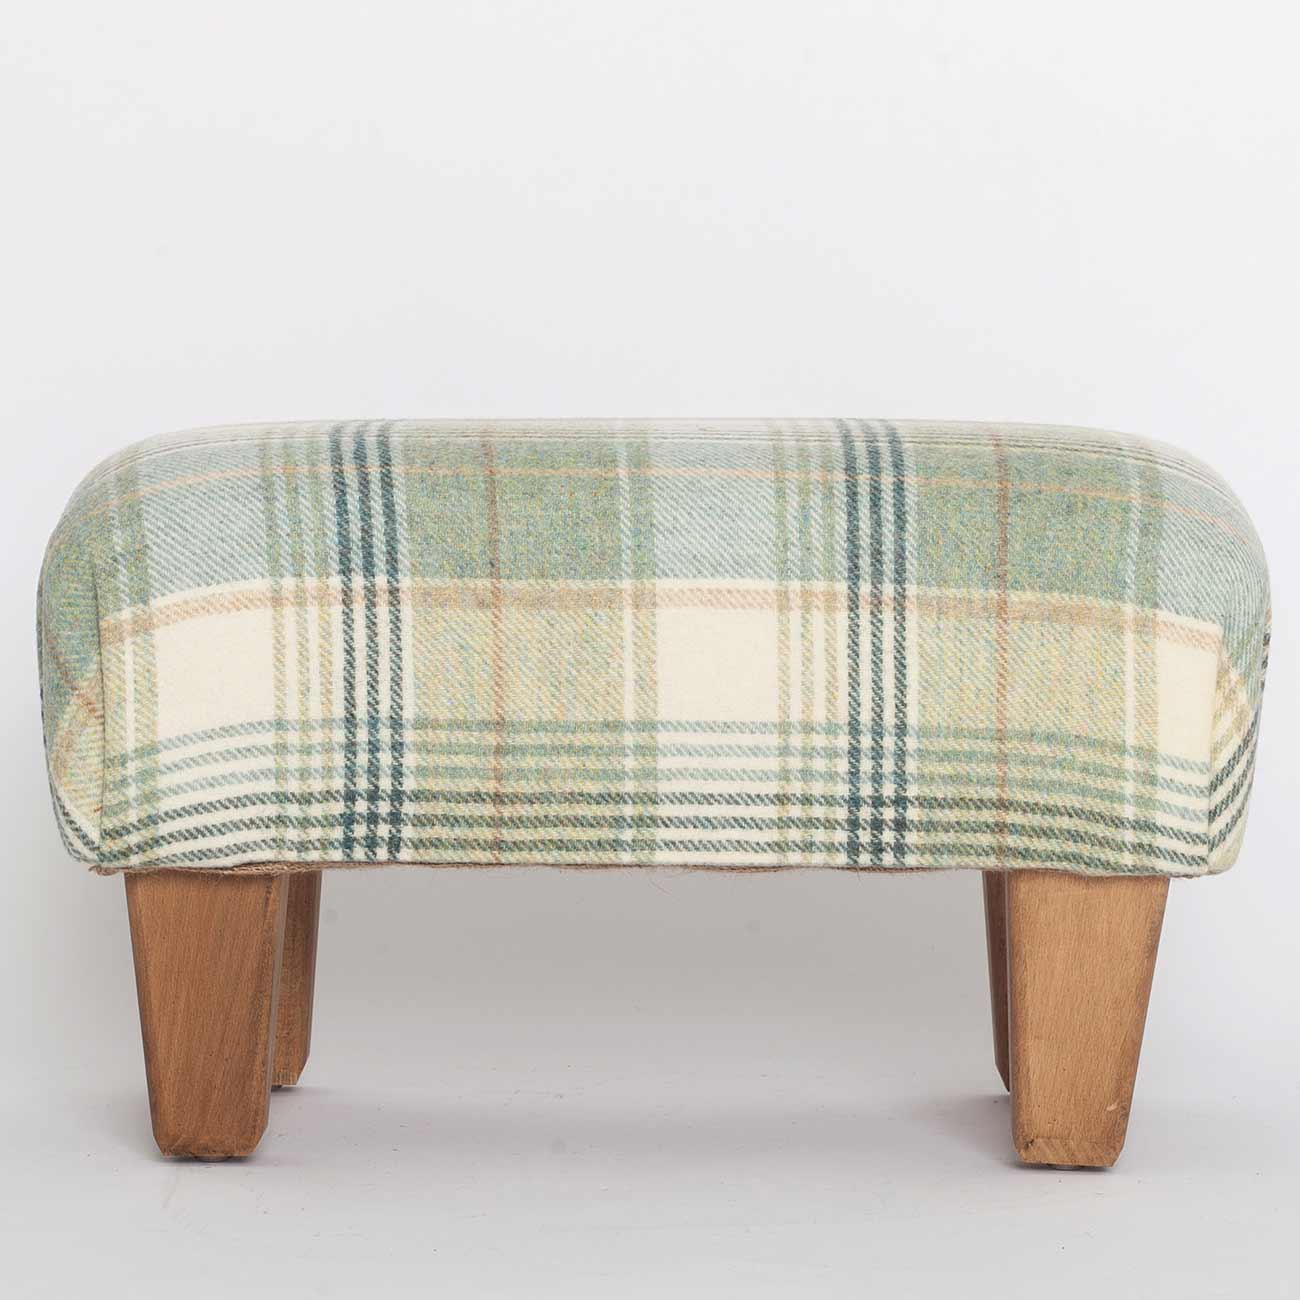 green-stripes-footstool4 fabric from JLP